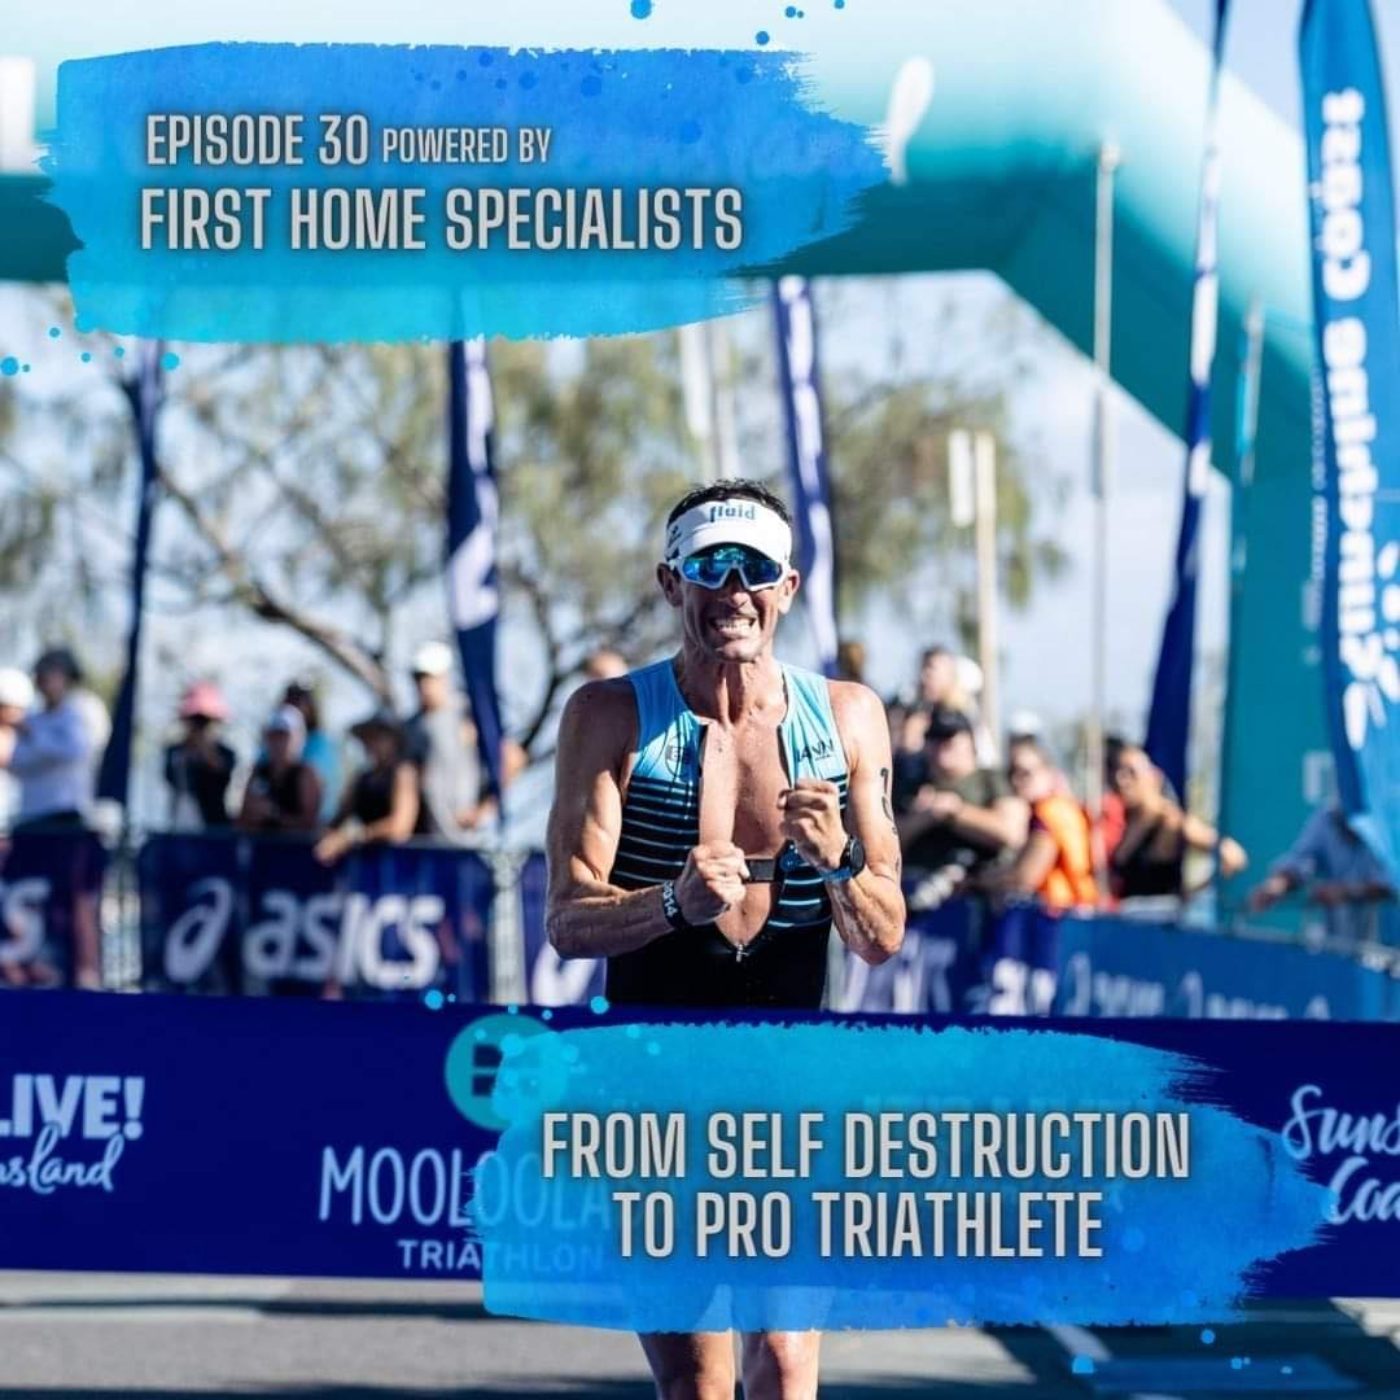 From self-destruction to becoming a pro triathlete.